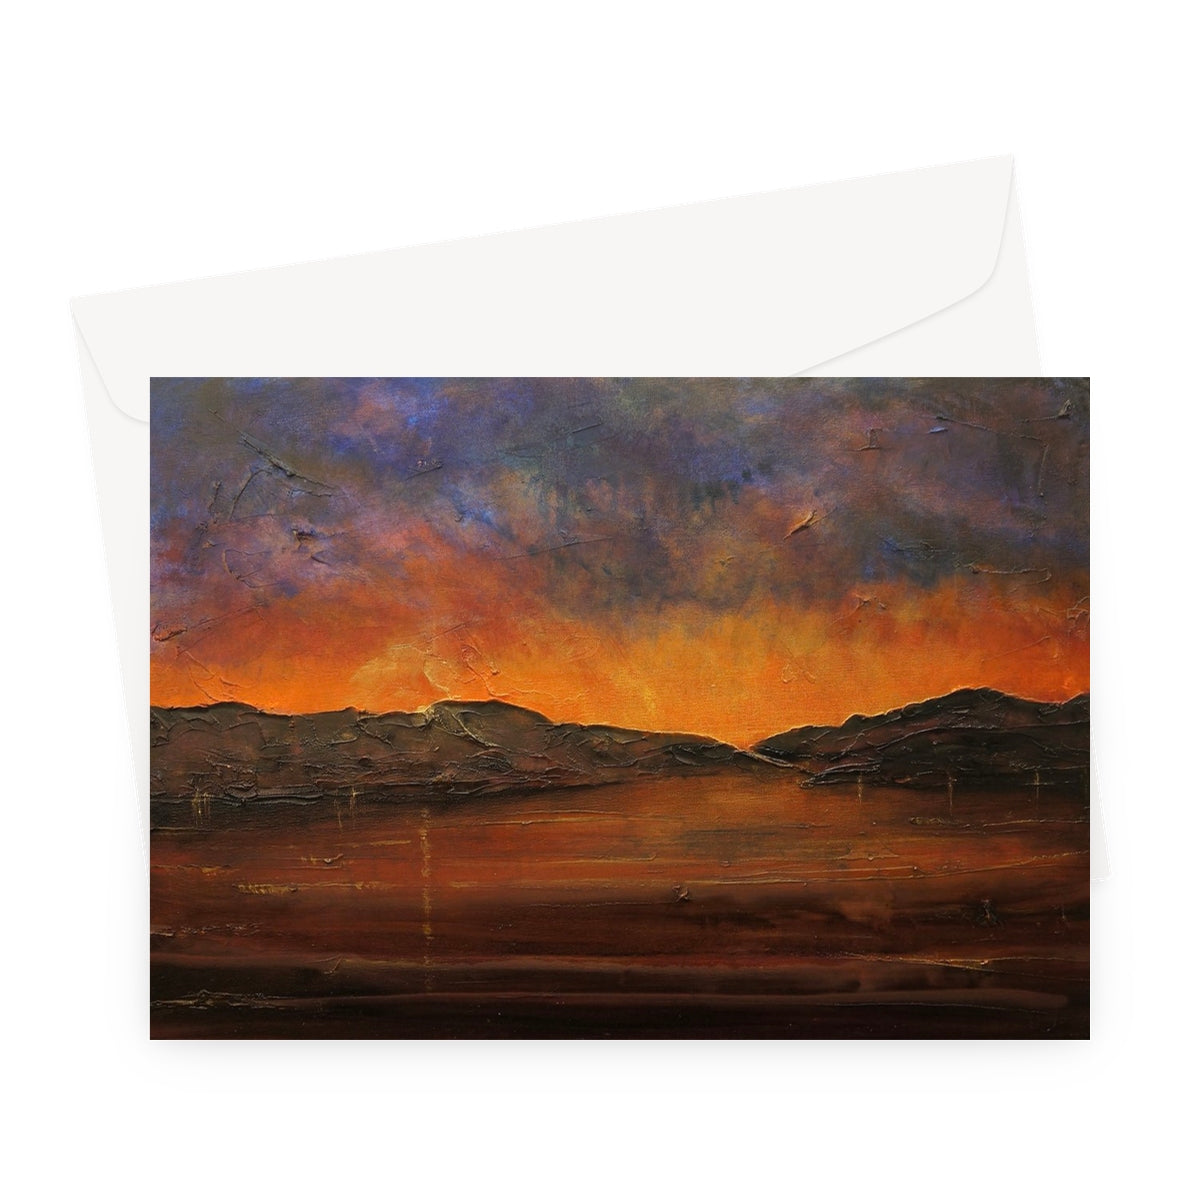 A Brooding Clyde Dusk Art Gifts Greeting Card-Stationery-River Clyde Art Gallery-A5 Landscape-1 Card-Paintings, Prints, Homeware, Art Gifts From Scotland By Scottish Artist Kevin Hunter